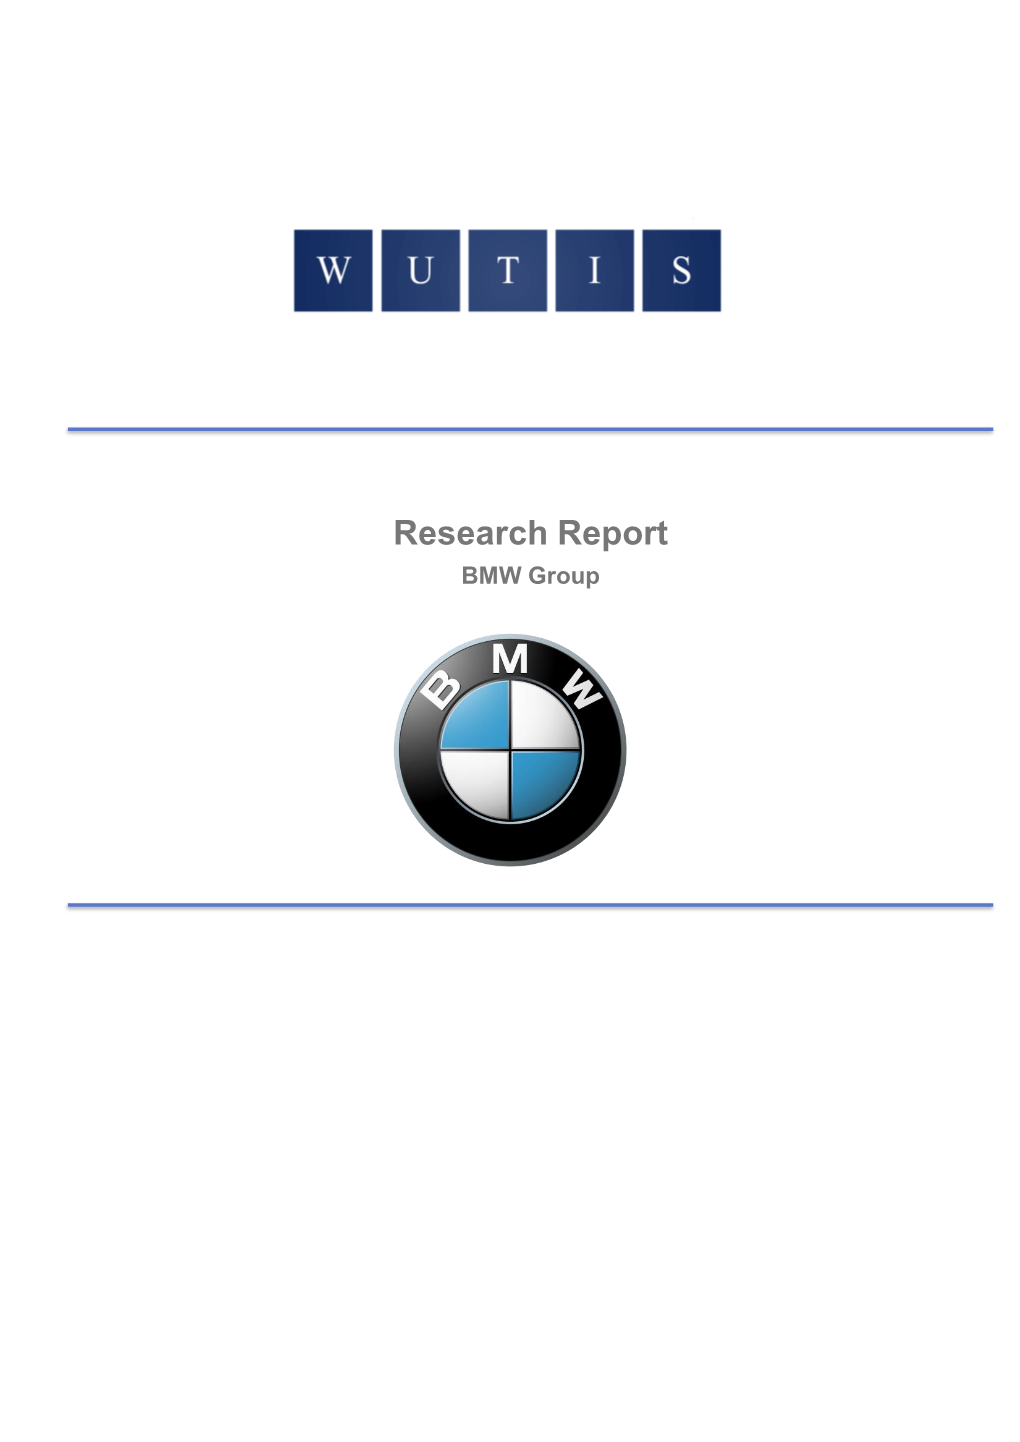 Research Report BMW Group WUTIS Student Research